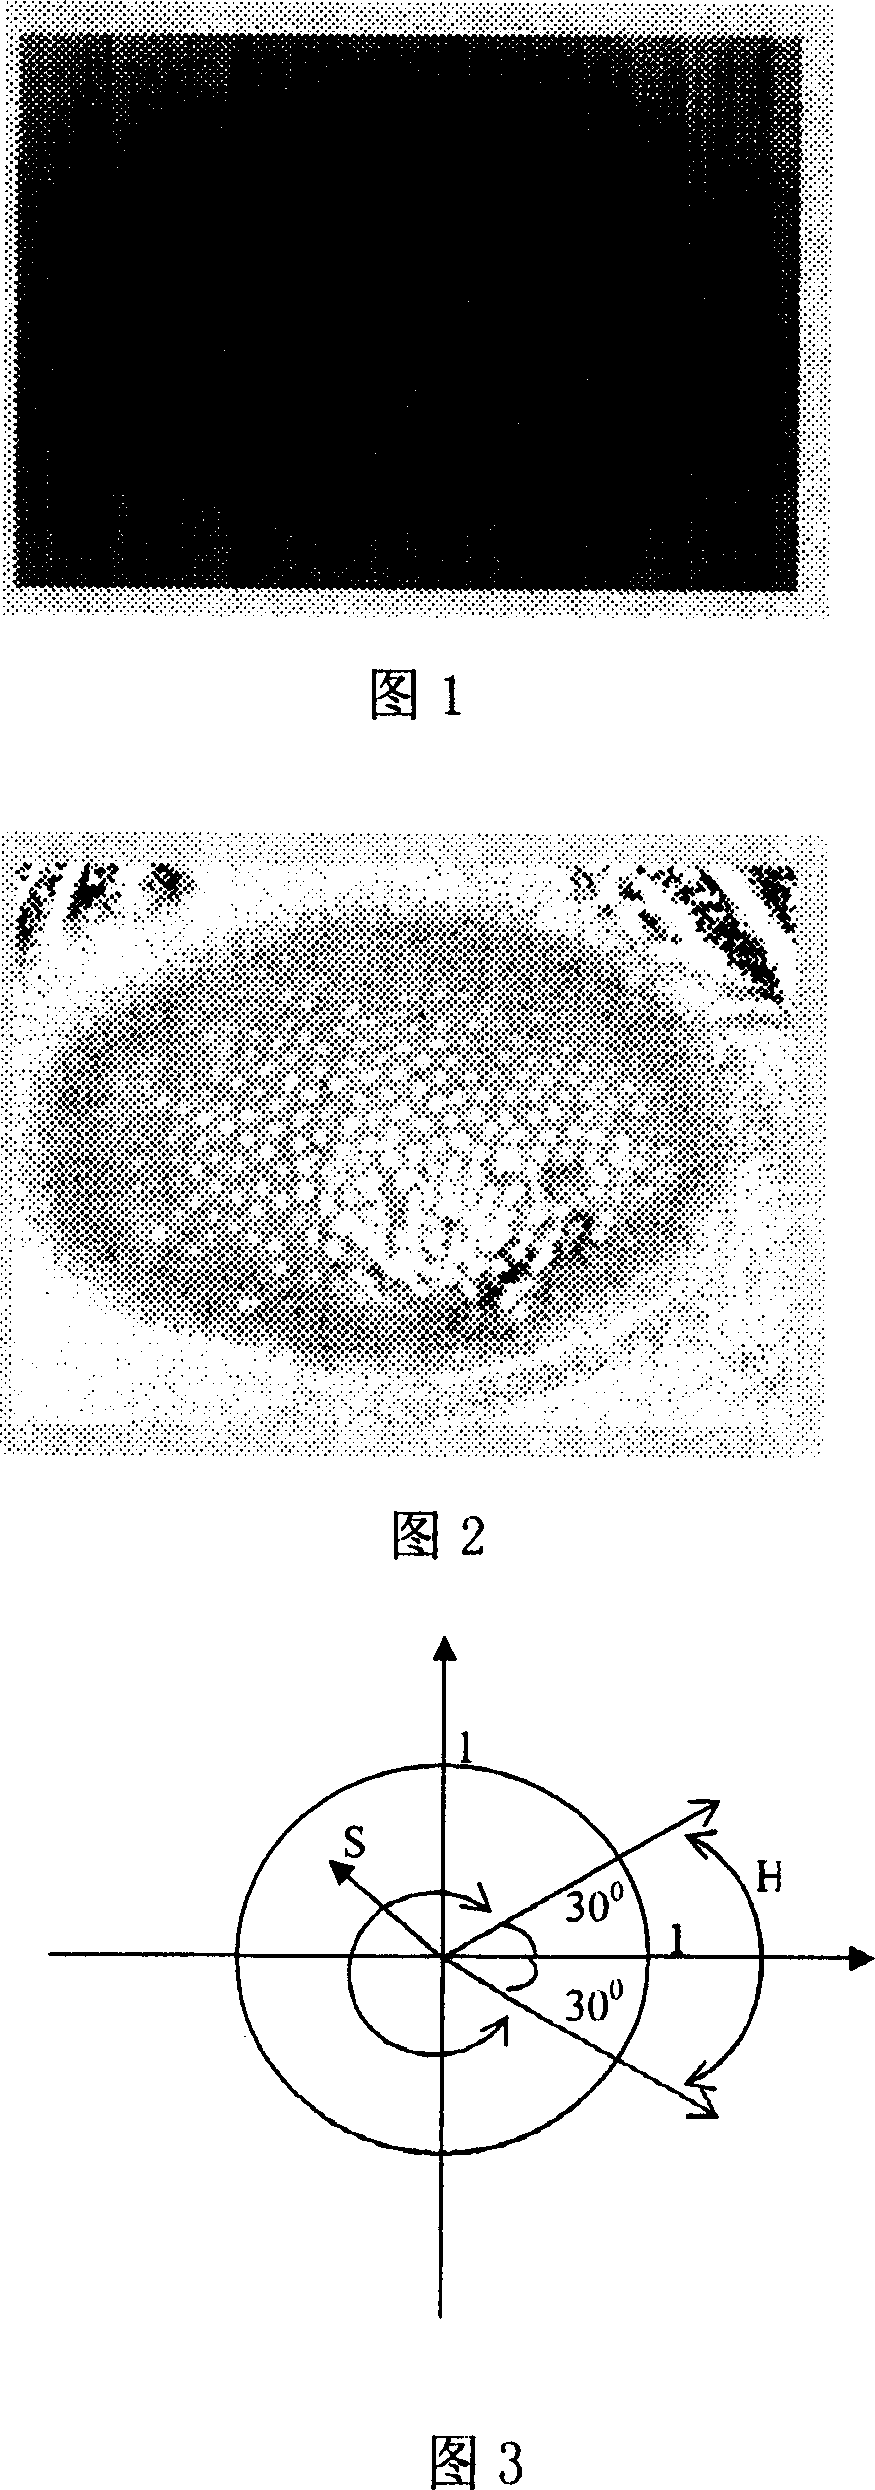 Method for picking-up gray-scaled images of fruit flies